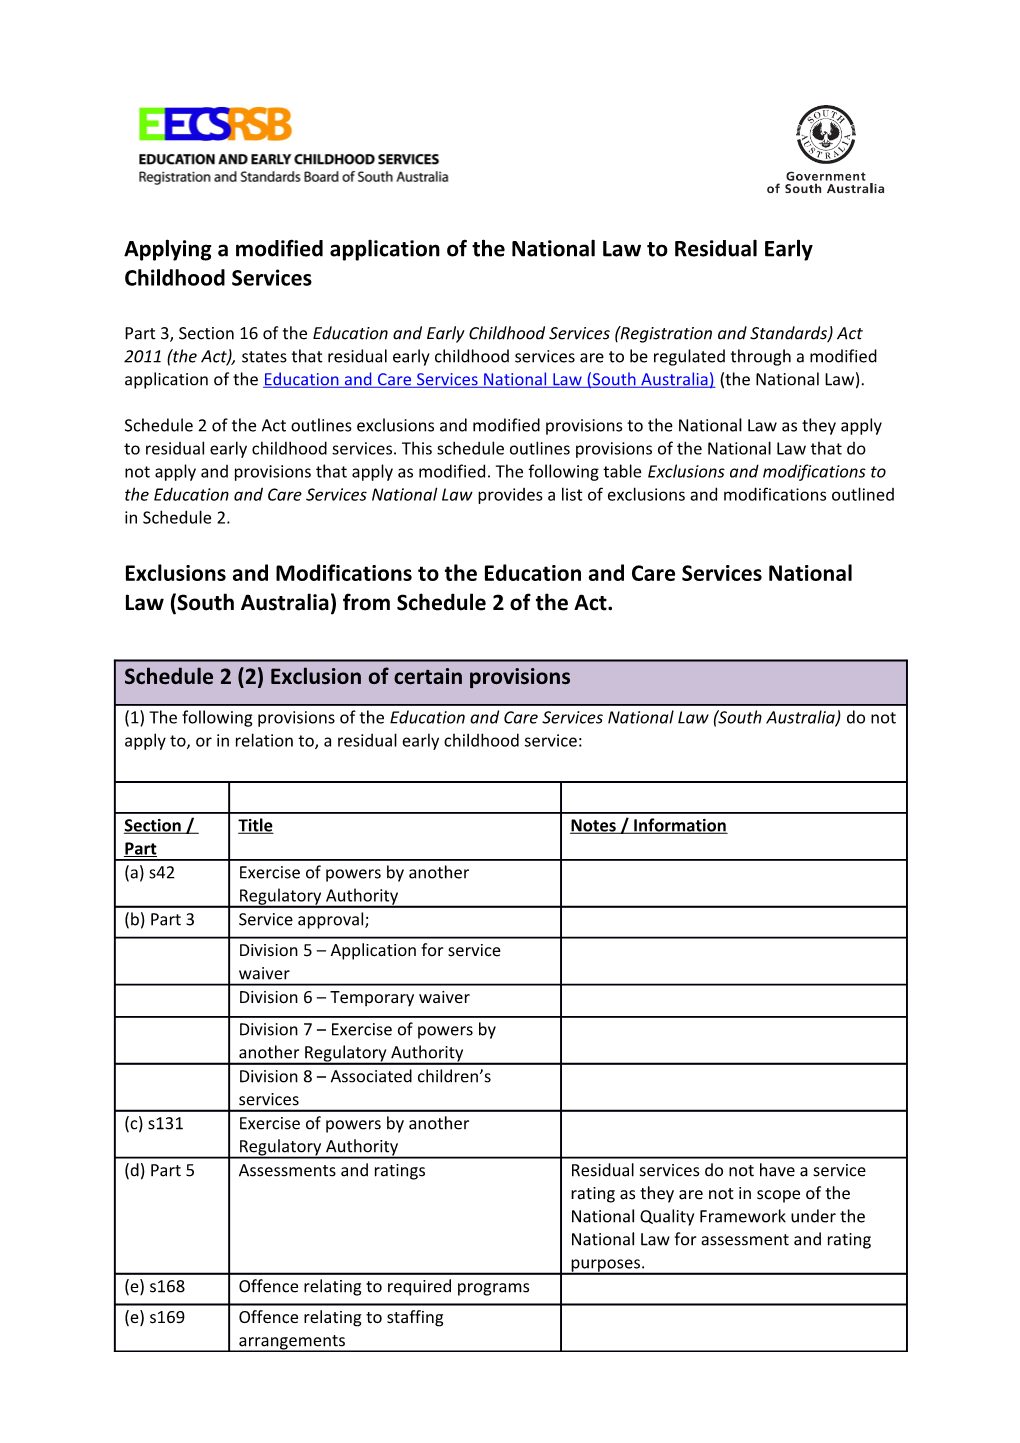 Applying a Modified Application of the National Law to Residual Early Childhood Services